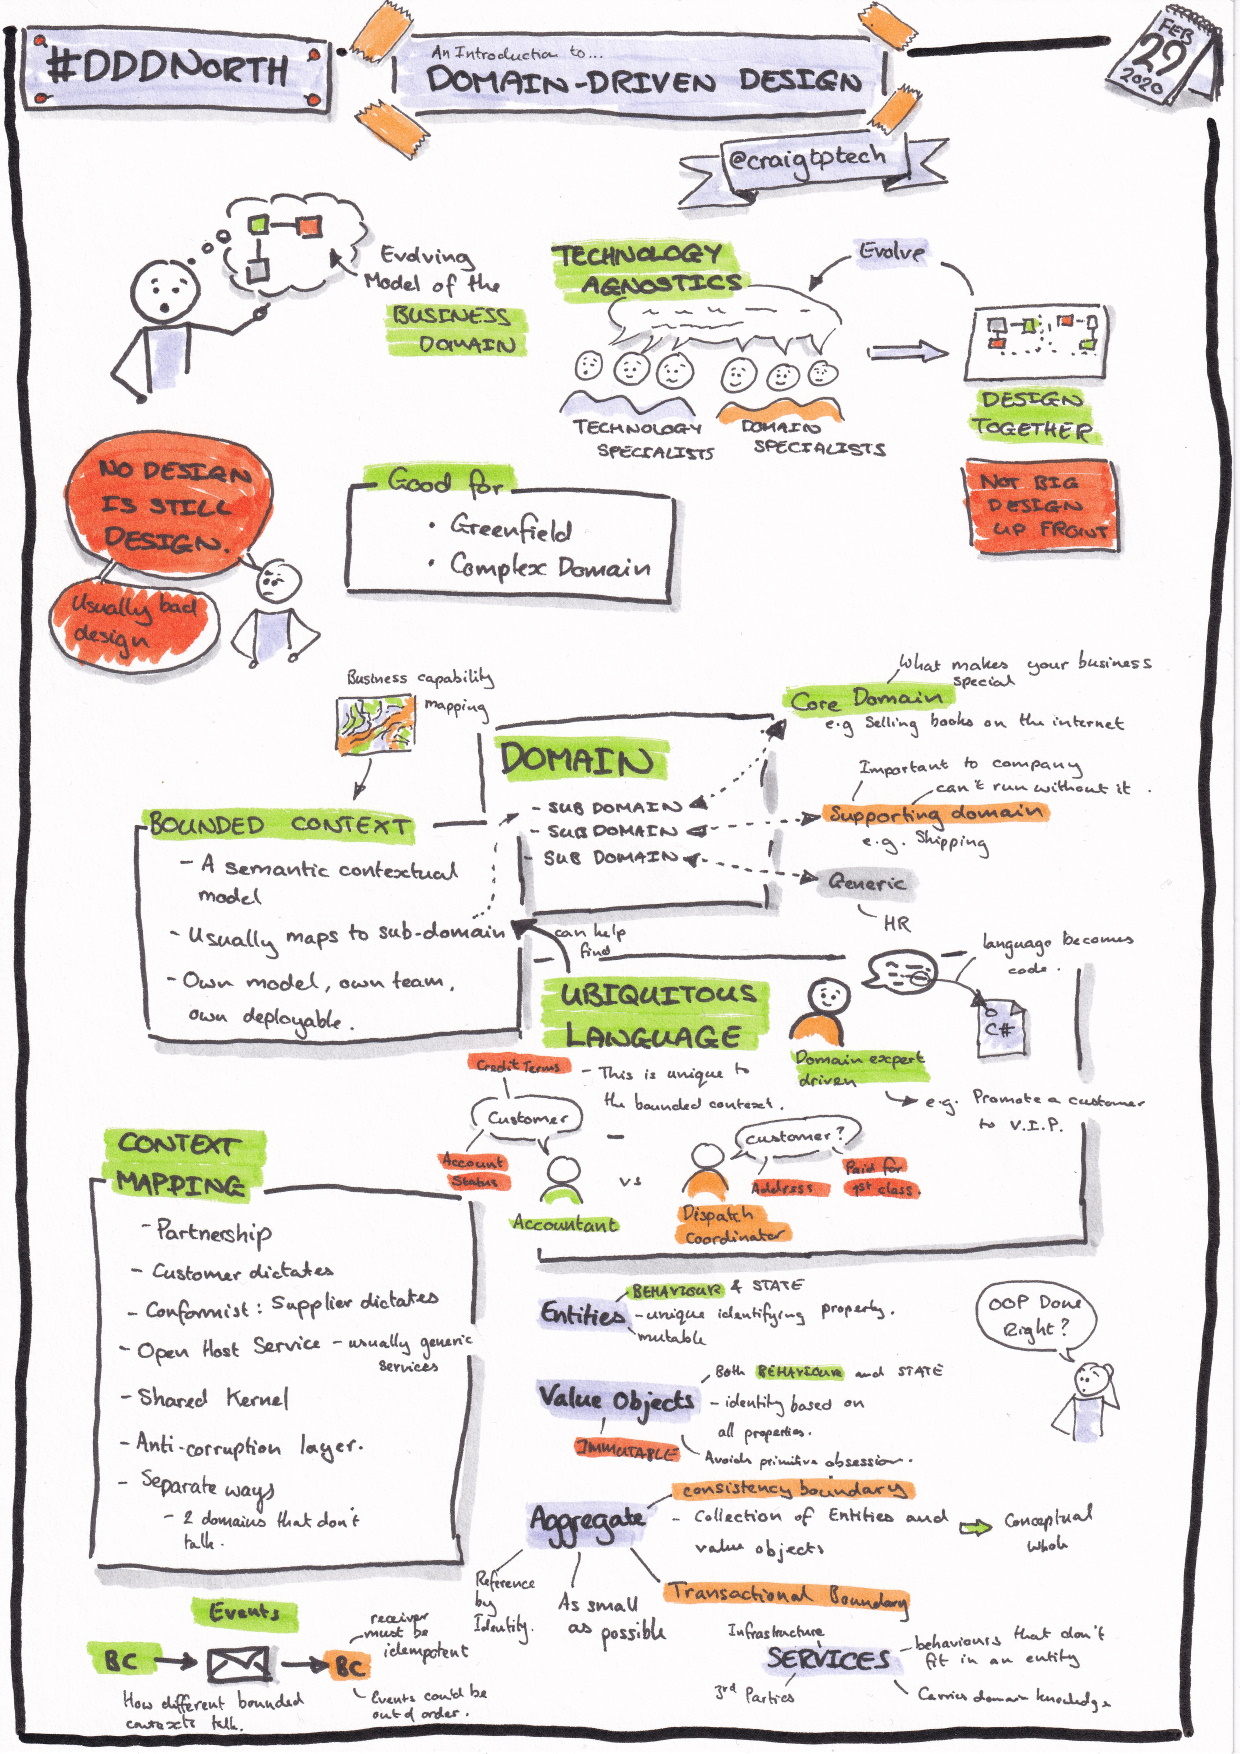 Sketchnotes from the talk 'An introduction to Domain-Driven Design?' by Craig Phillips